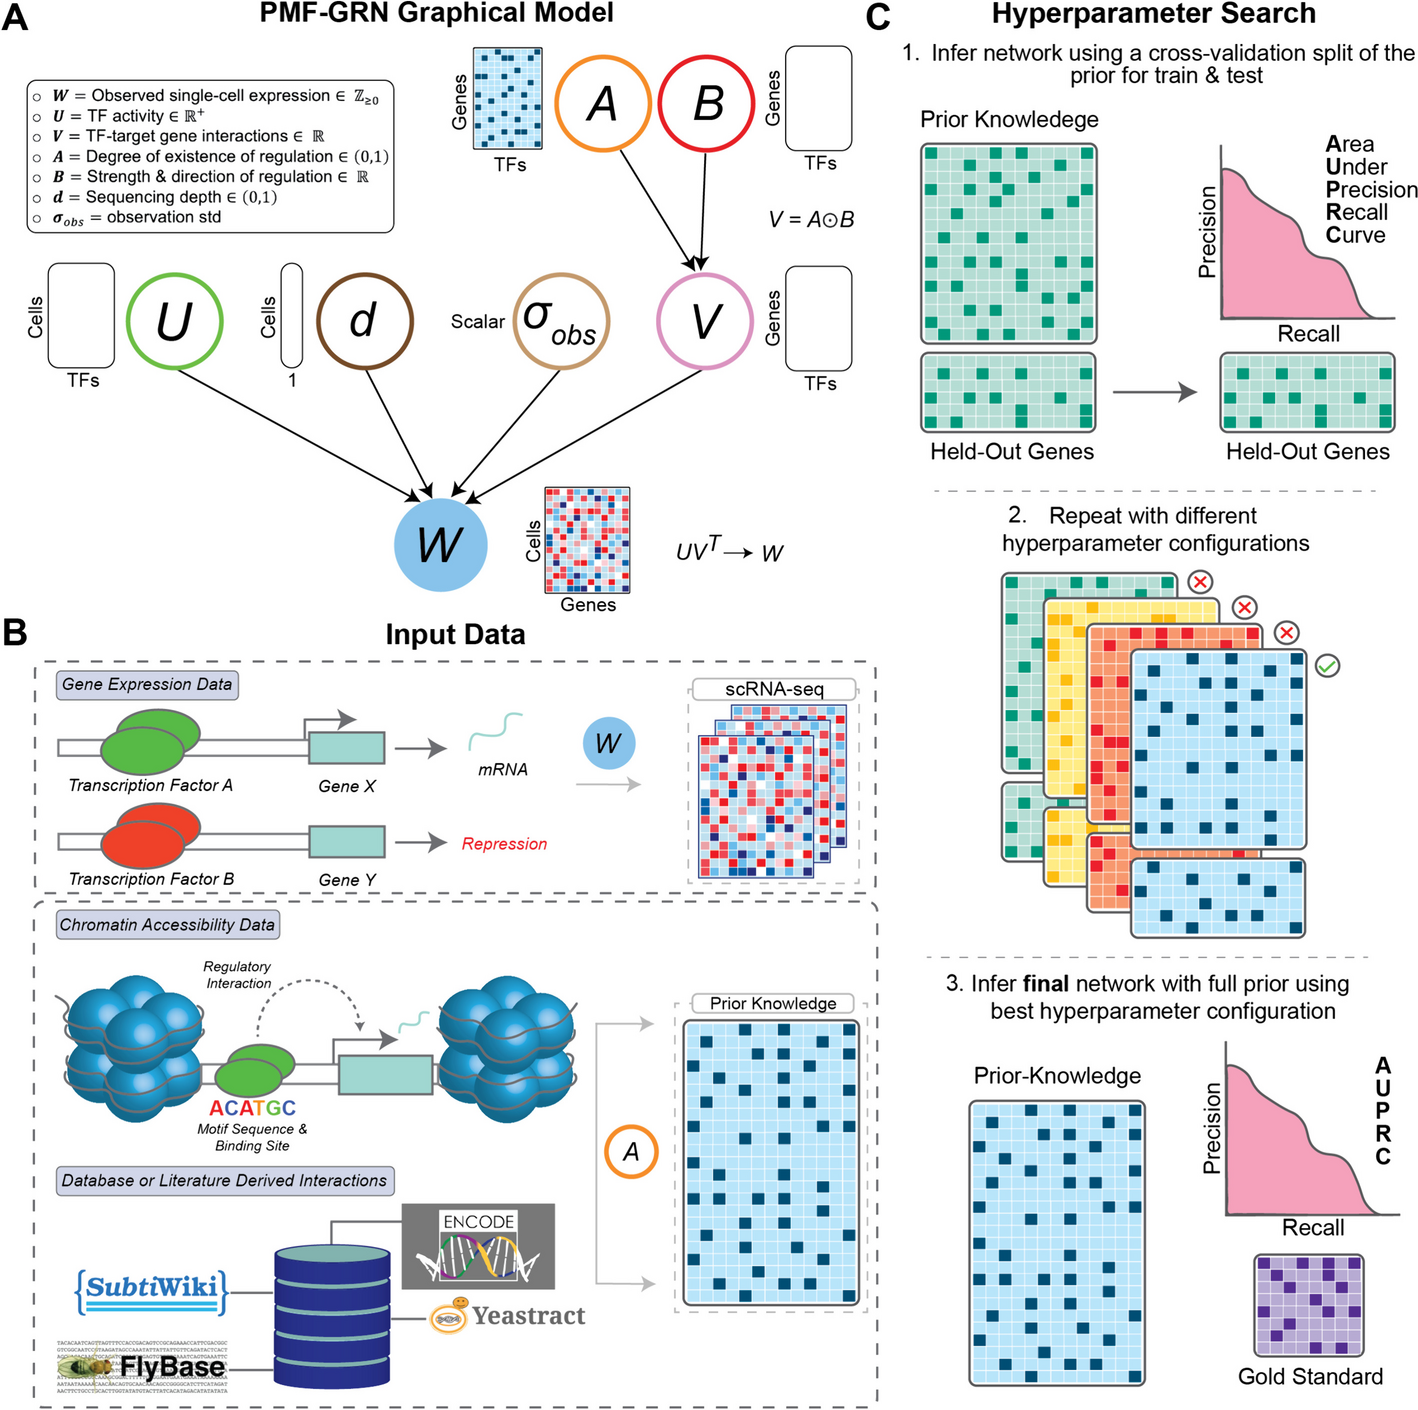 PMF-GRN: a variational inference approach to single-cell gene regulatory network inference using probabilistic matrix factorization